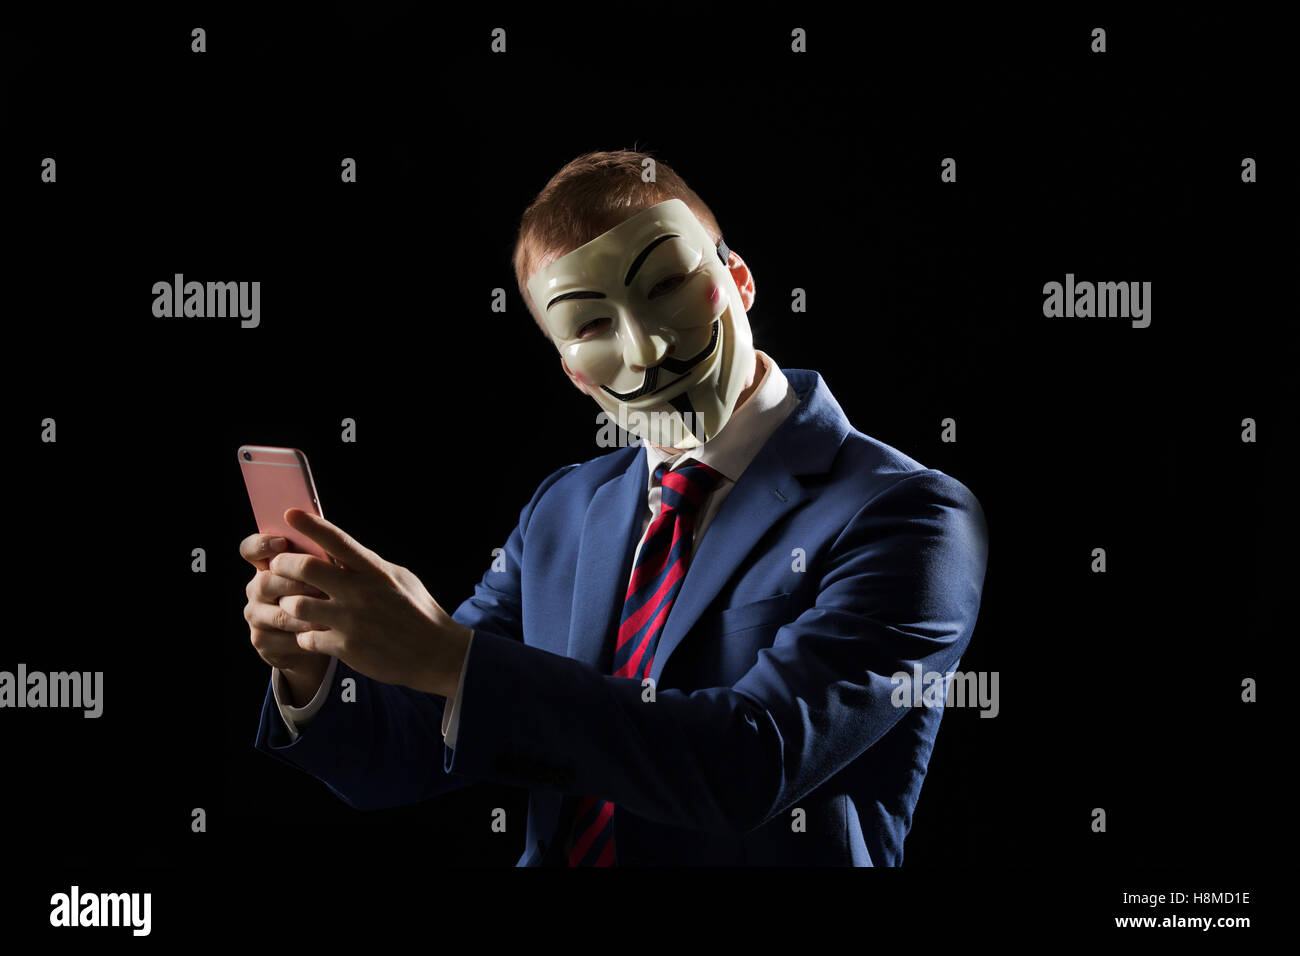 Business man under the mask disguise being  Anonymous and implying that he is a hacker or anarchist Stock Photo